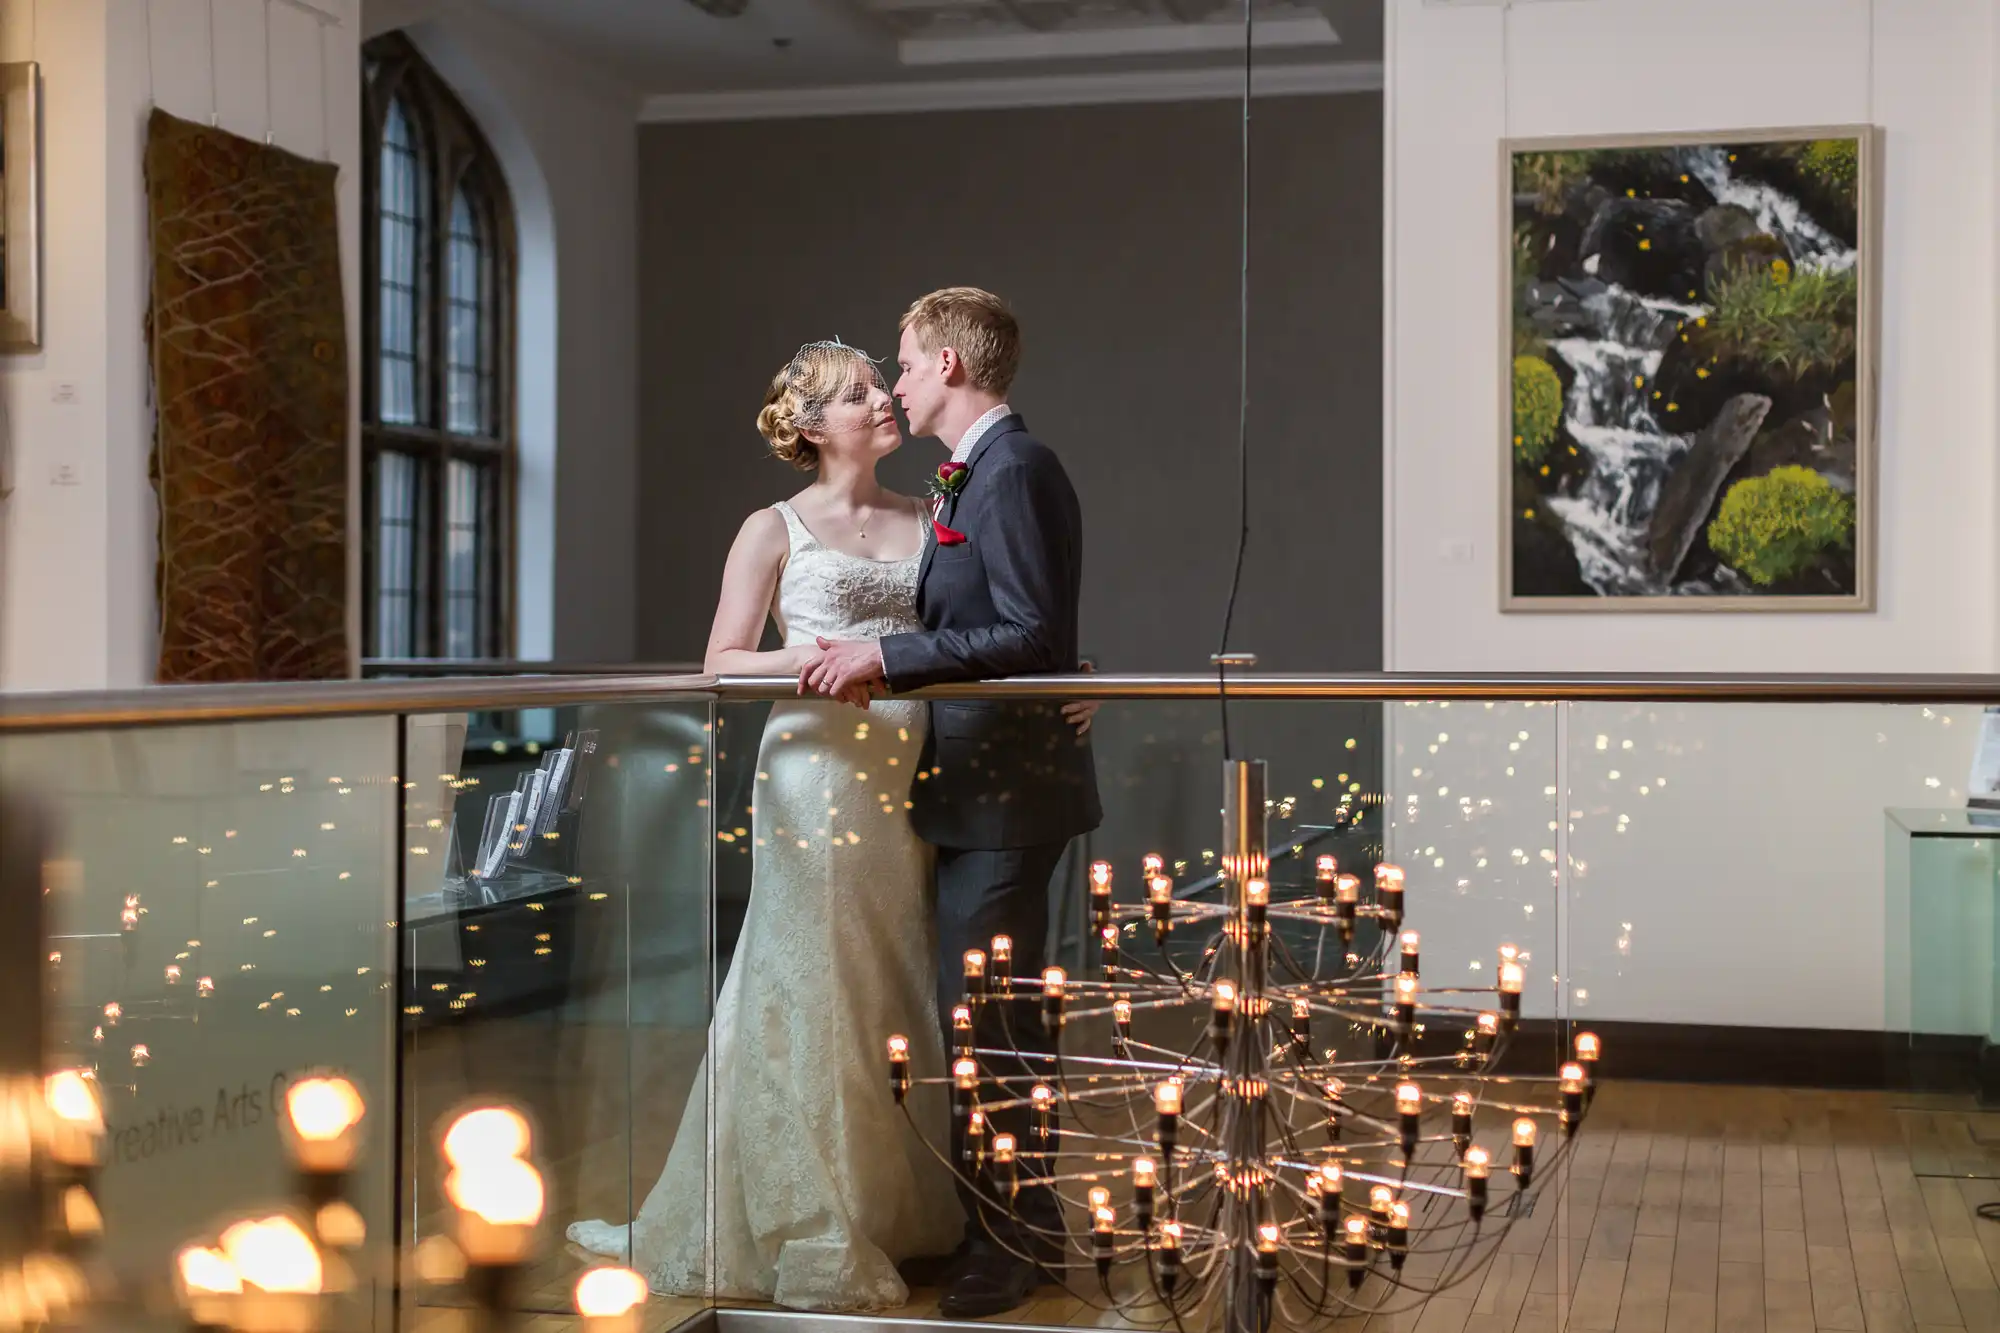 A newlywed couple shares an intimate moment in an art gallery, standing next to a sparkling chandelier with artwork in the background.